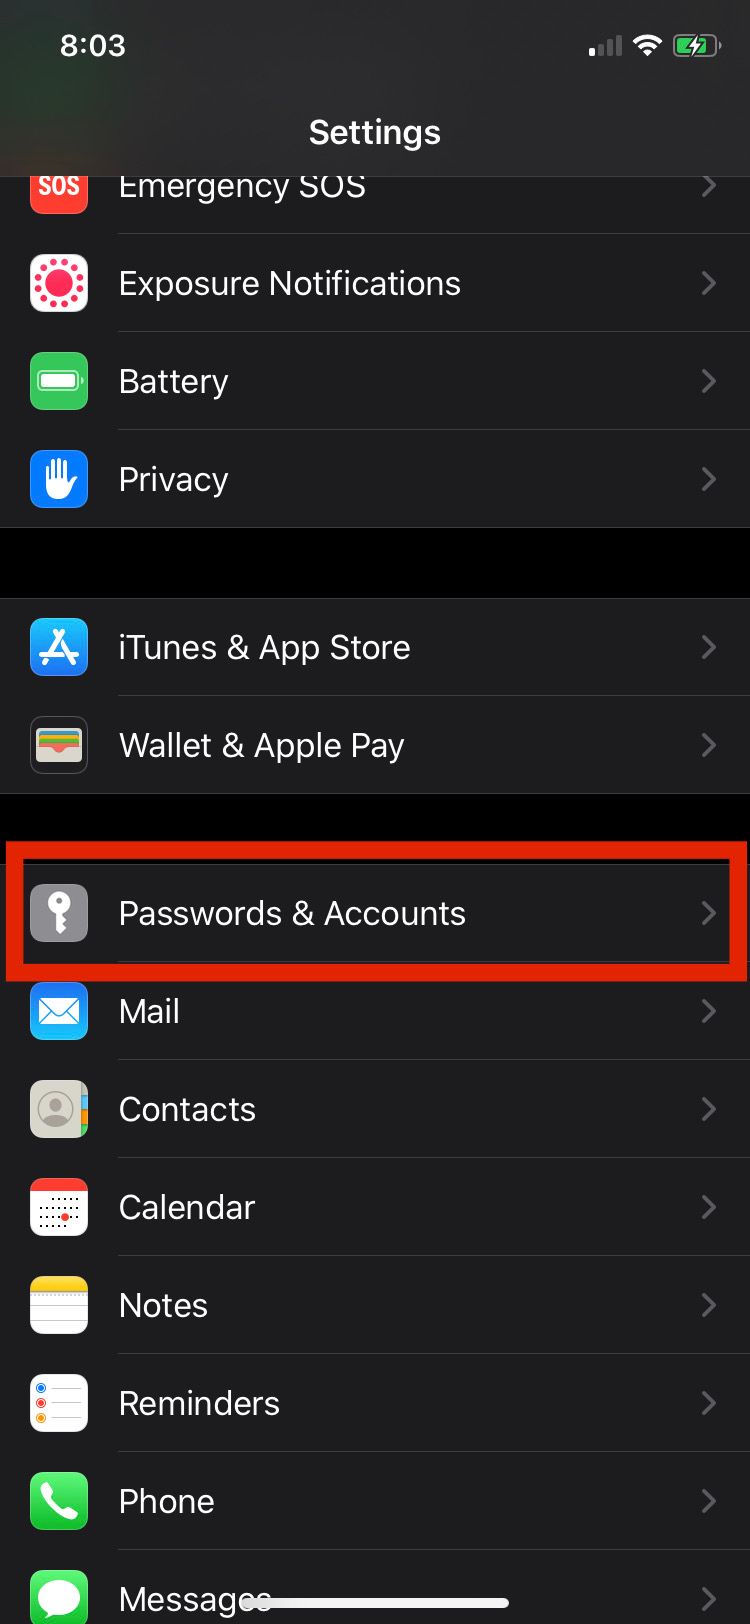 Passwords and Accounts settings.